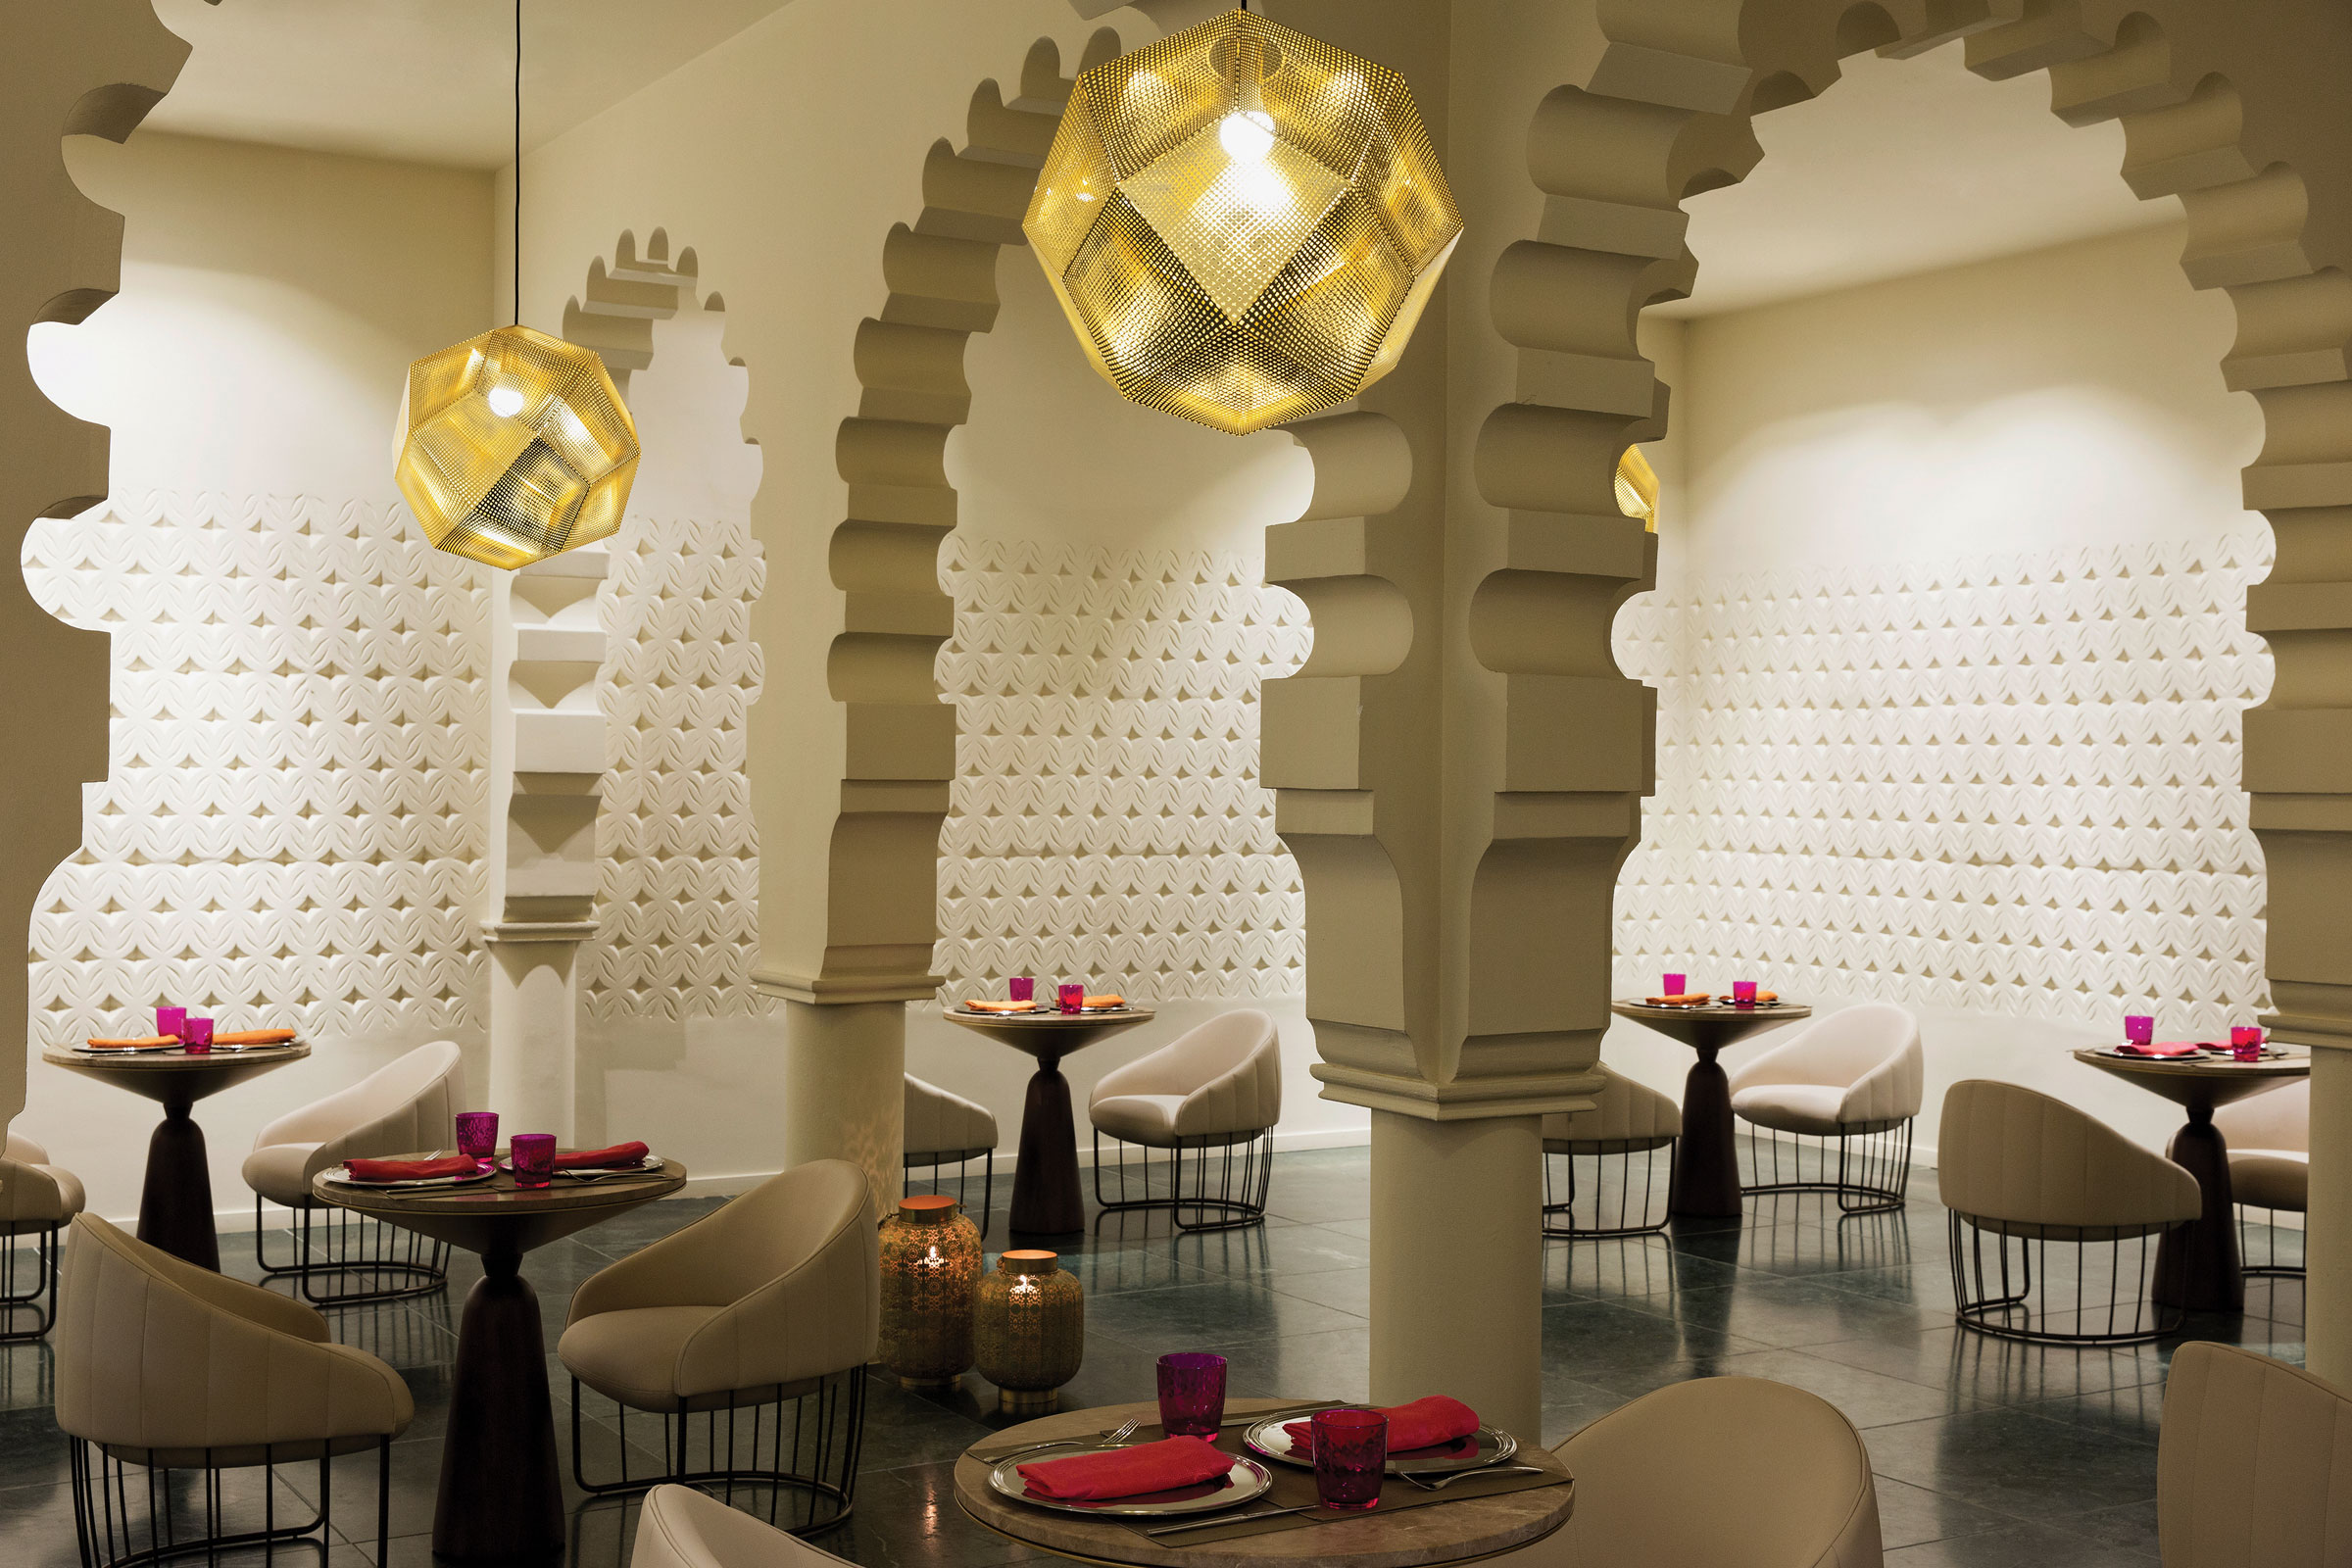 Basmati Restaurant at Excellence El Carmen Revamped versions of Indian dishes